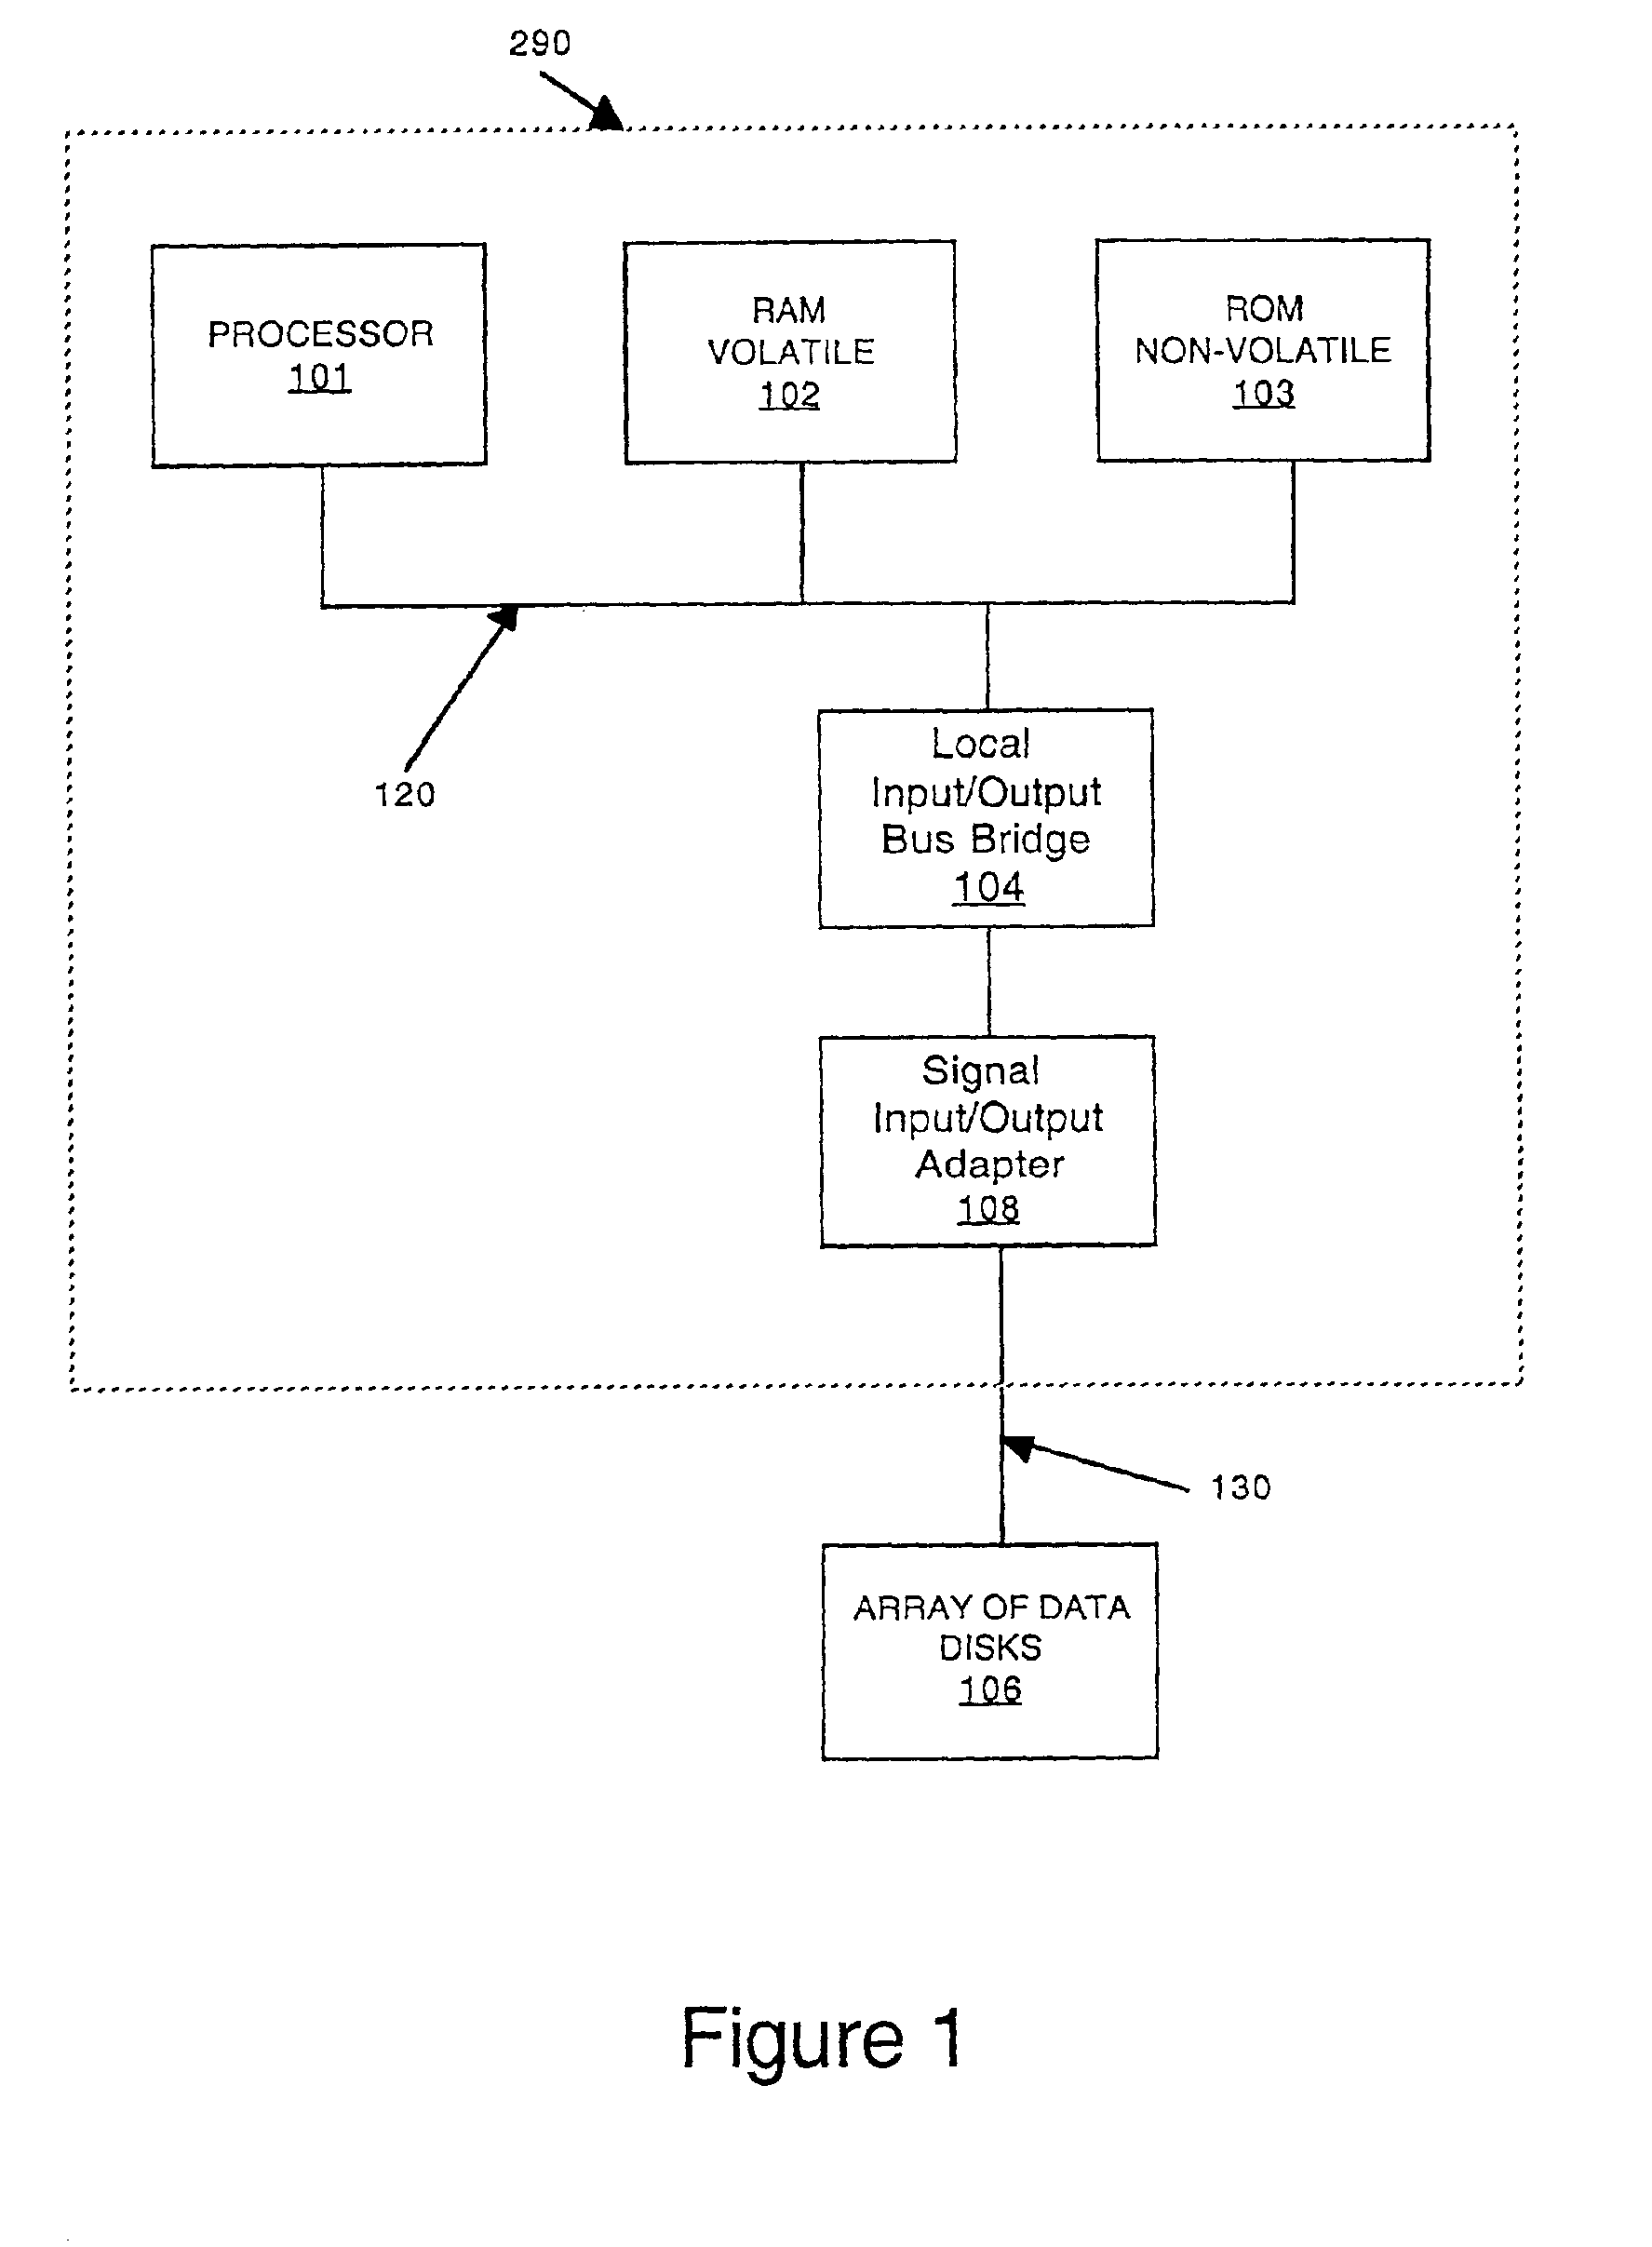 Method and system for striping spares in a data storage system including an array of disk drives